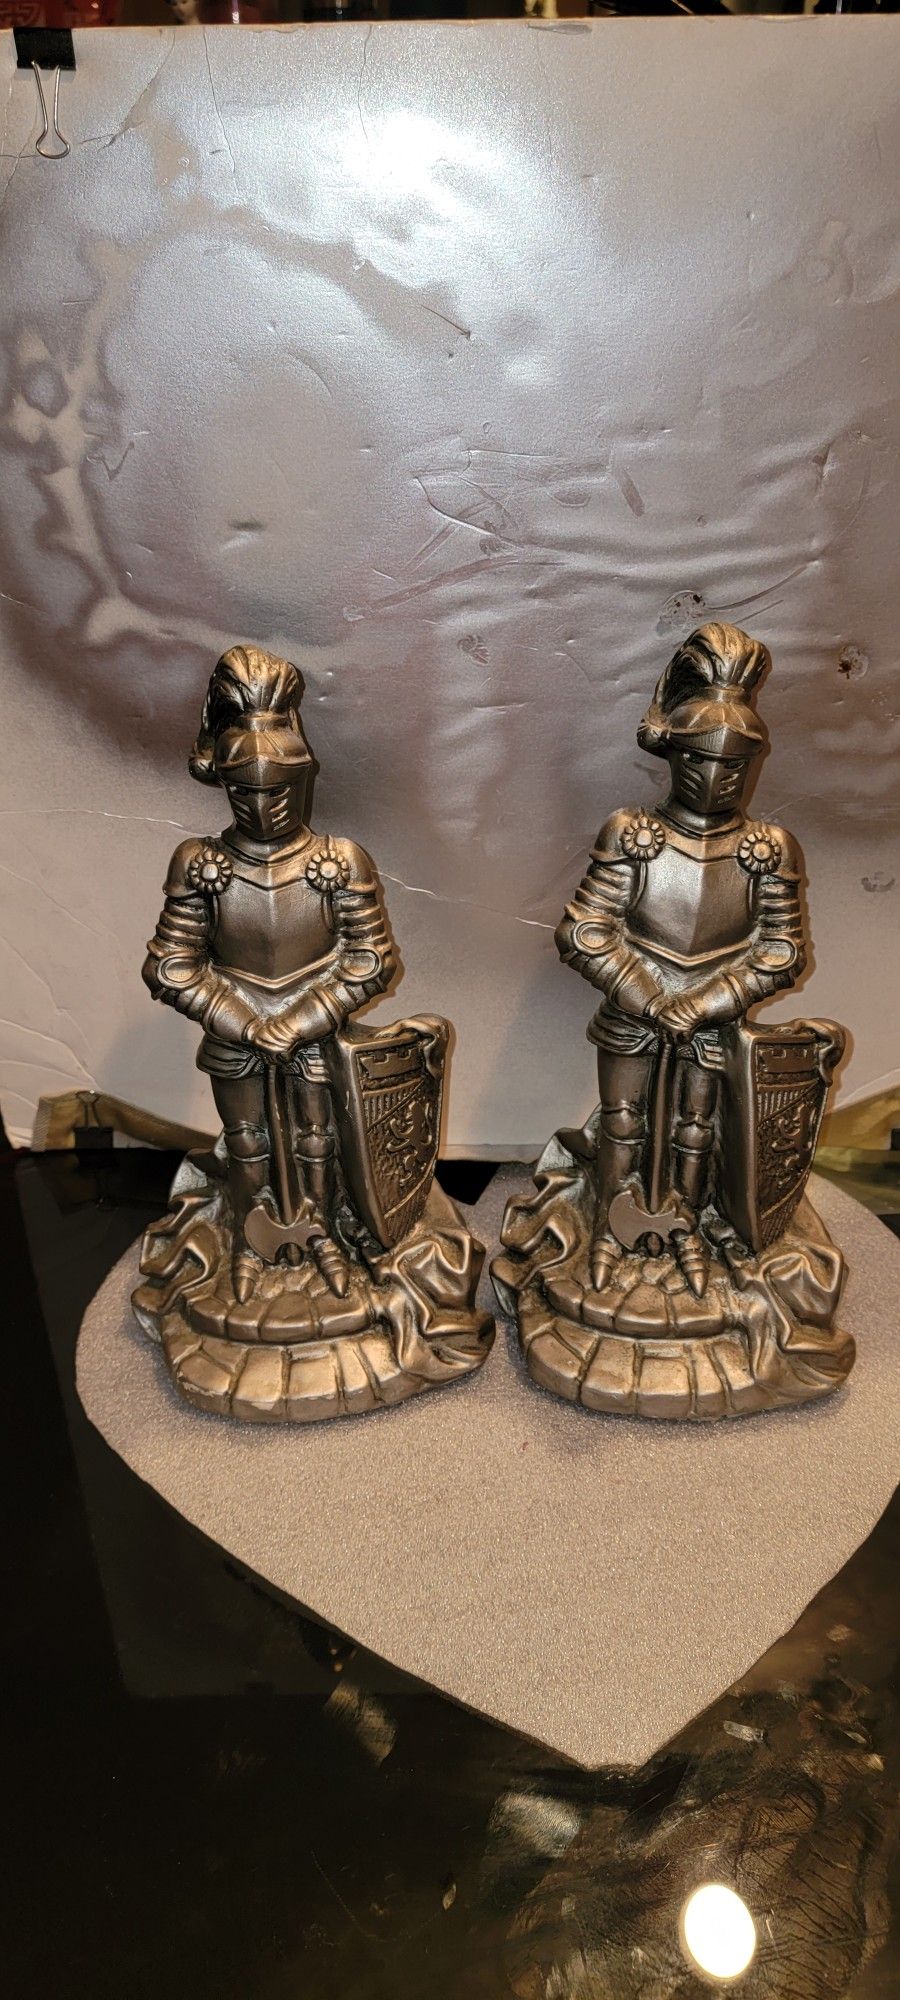 1963 MID-CENTURY ARMORED KNIGHTS STATUE BOOKENDS UNIVERSAL STATUARY CORP 12" TALL 